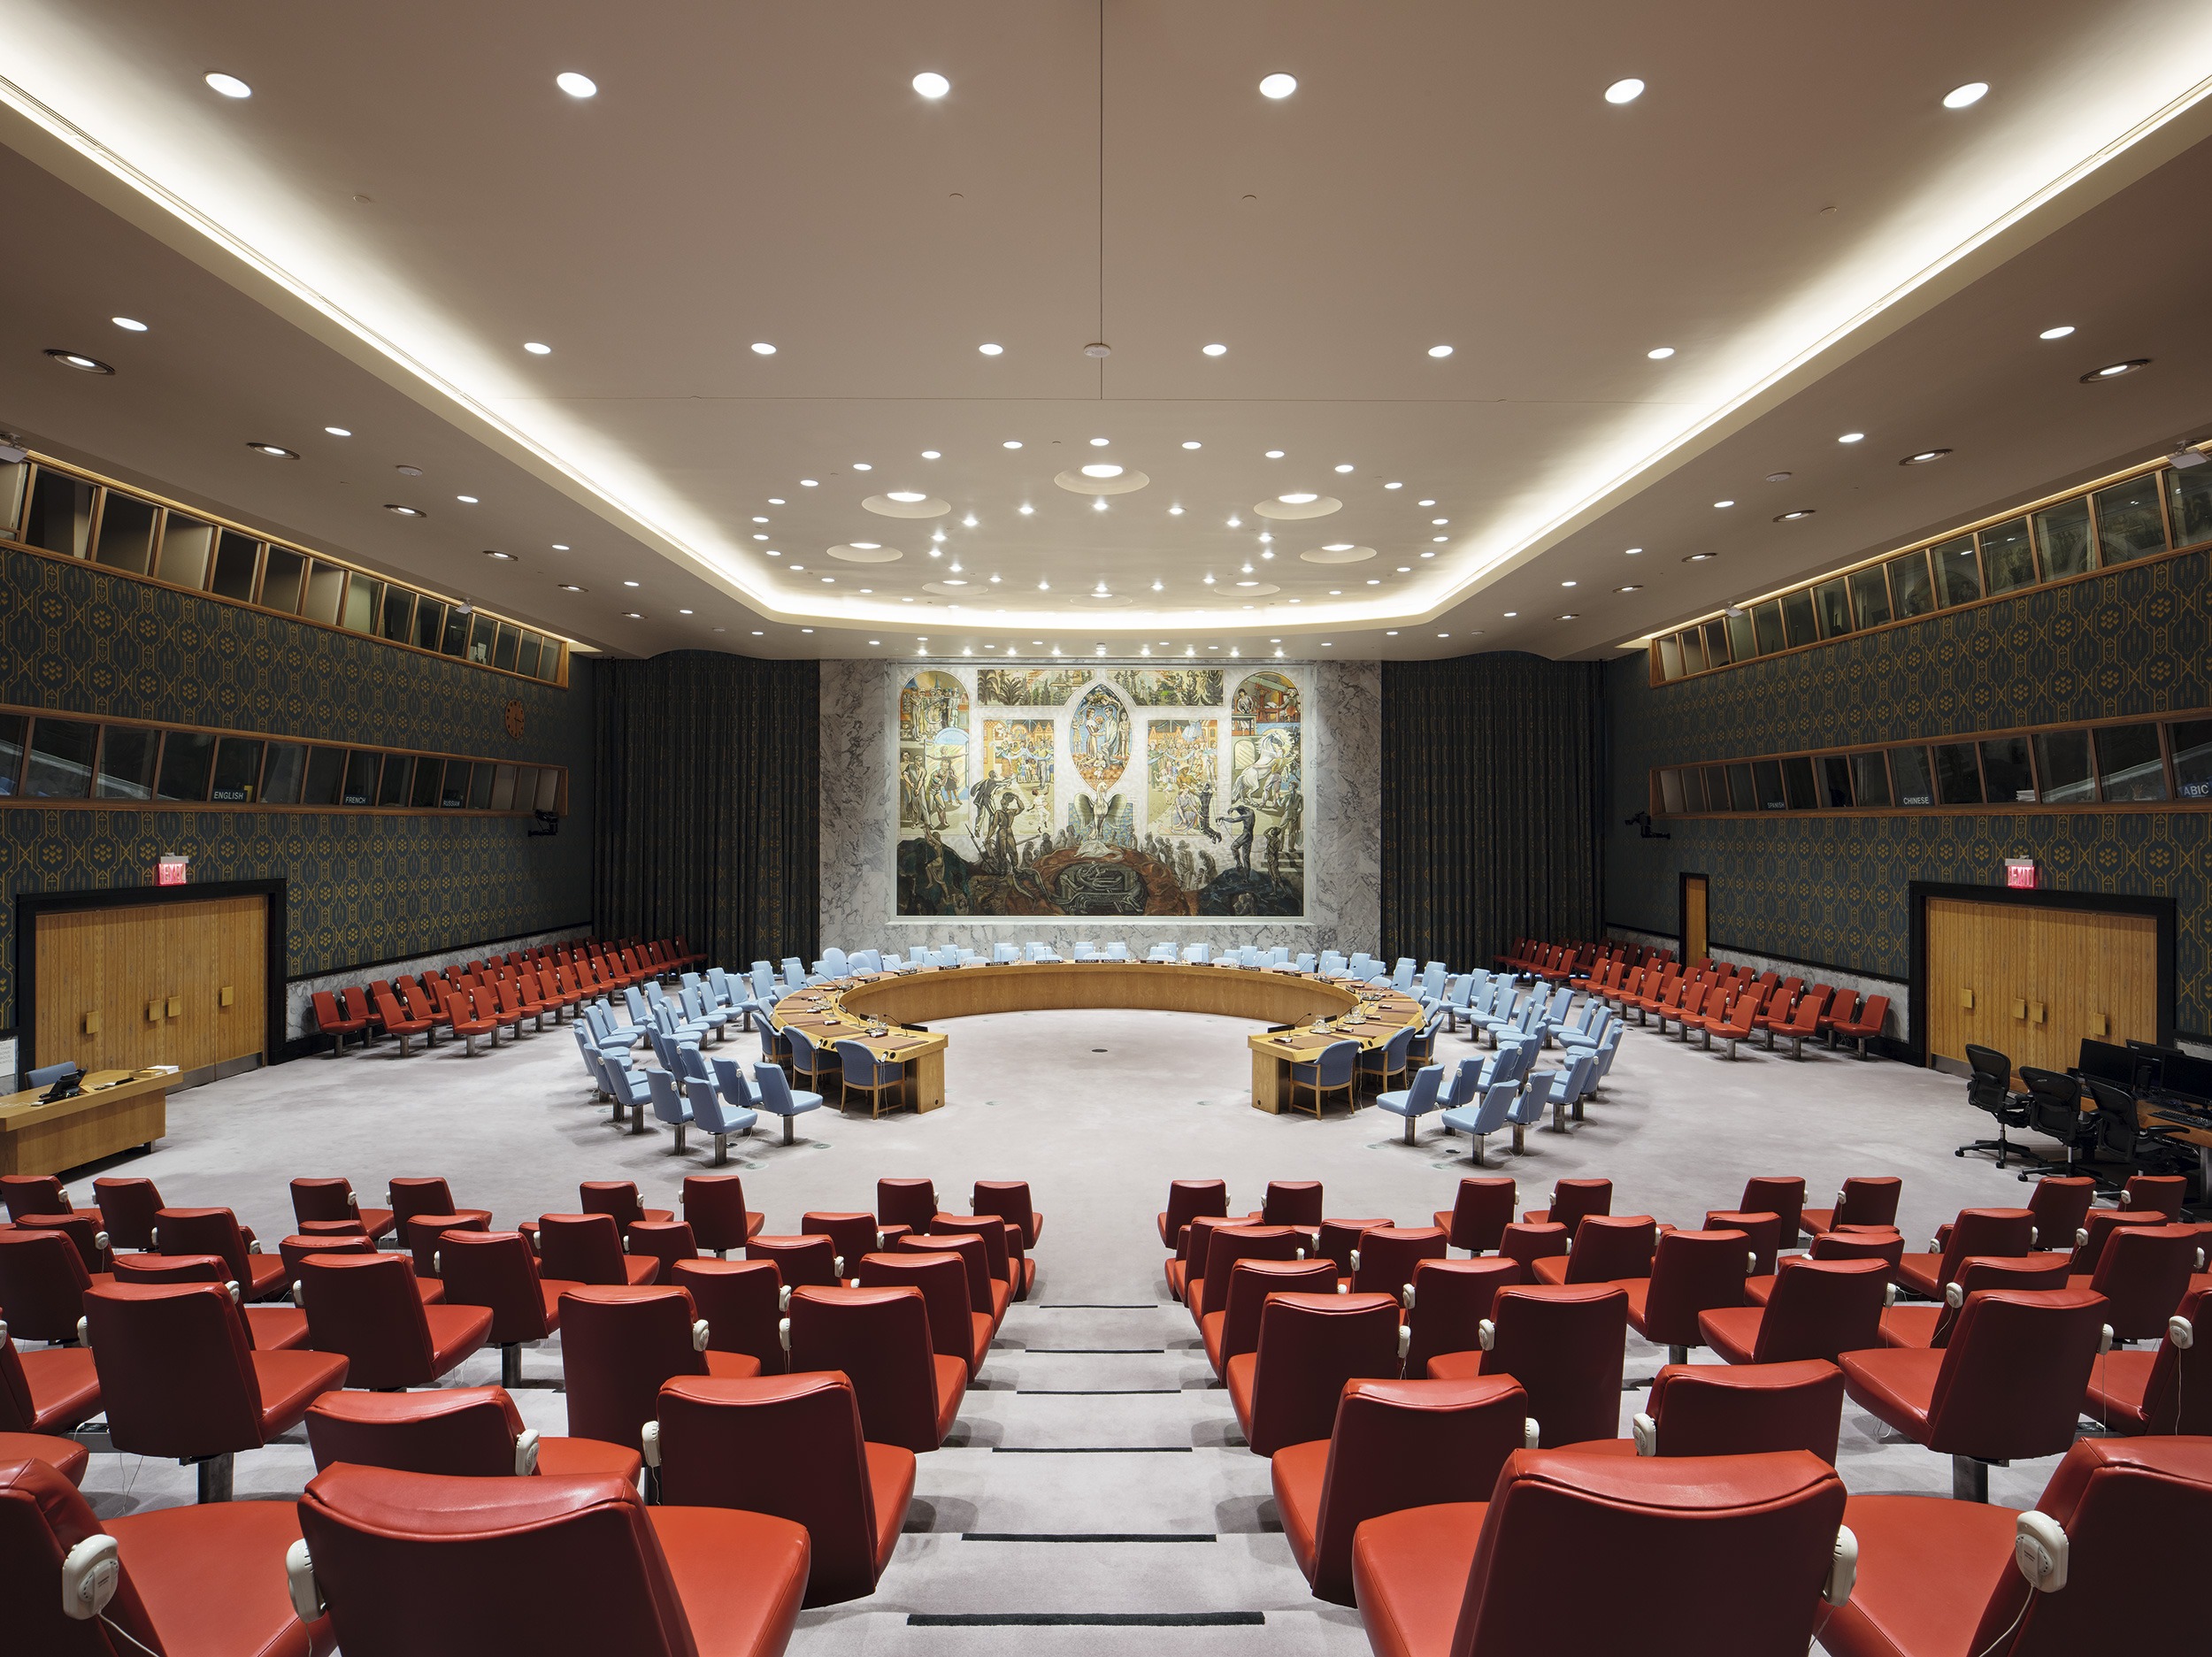 The UN Security Council’s Chamber. Photo: Ivan Brodey©Per Krohg-BONO.